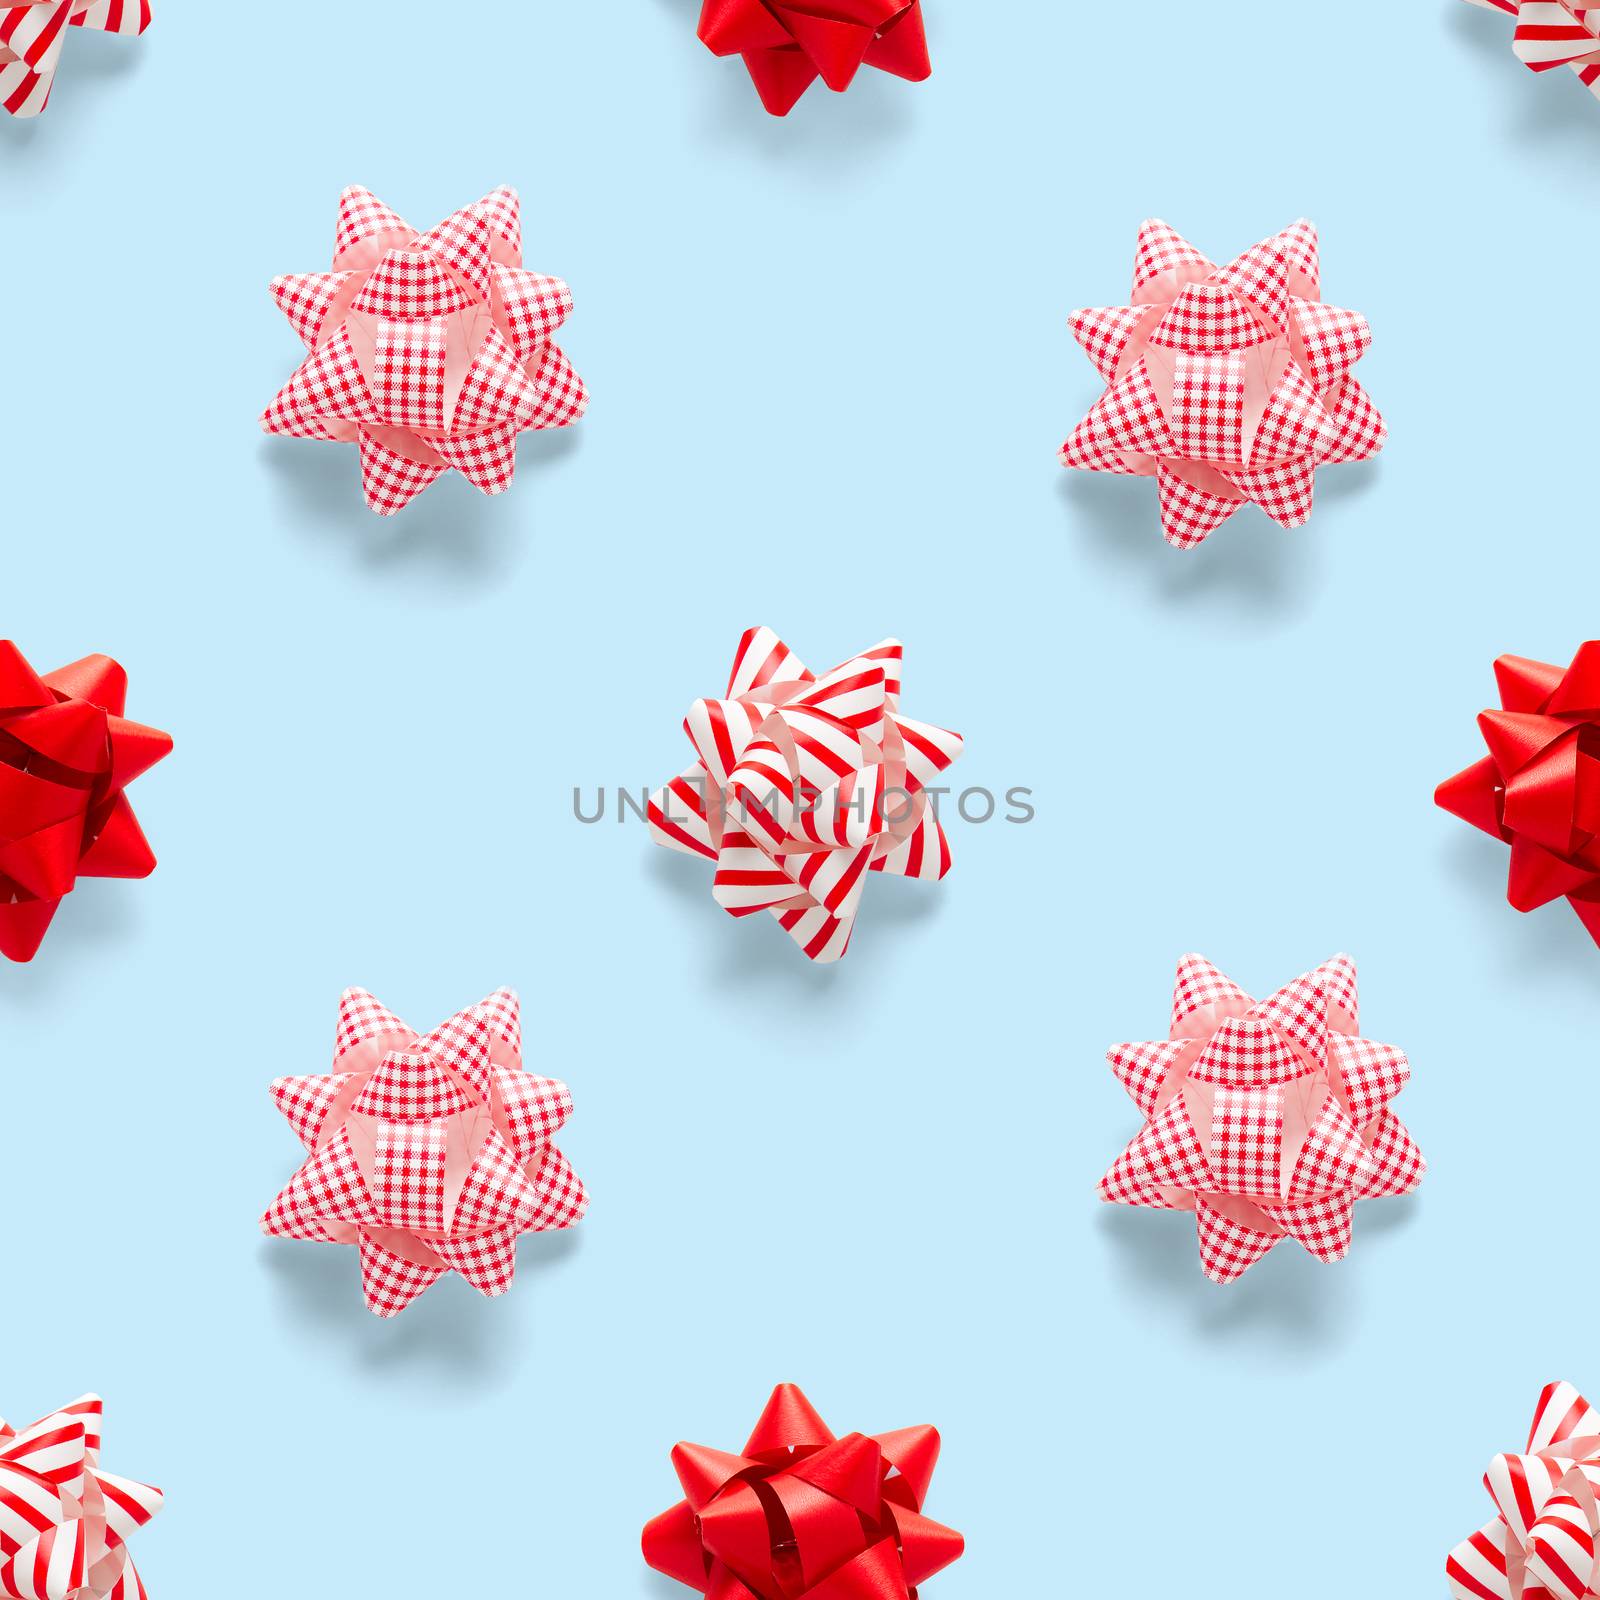 Seamless regular creative Christmas pattern with New Year decorations on blue background. xmas Modern Seamless pattern made from christmas decorations. Photo quality pattern for fabric, prints, wallpapers, banners or creative design works.